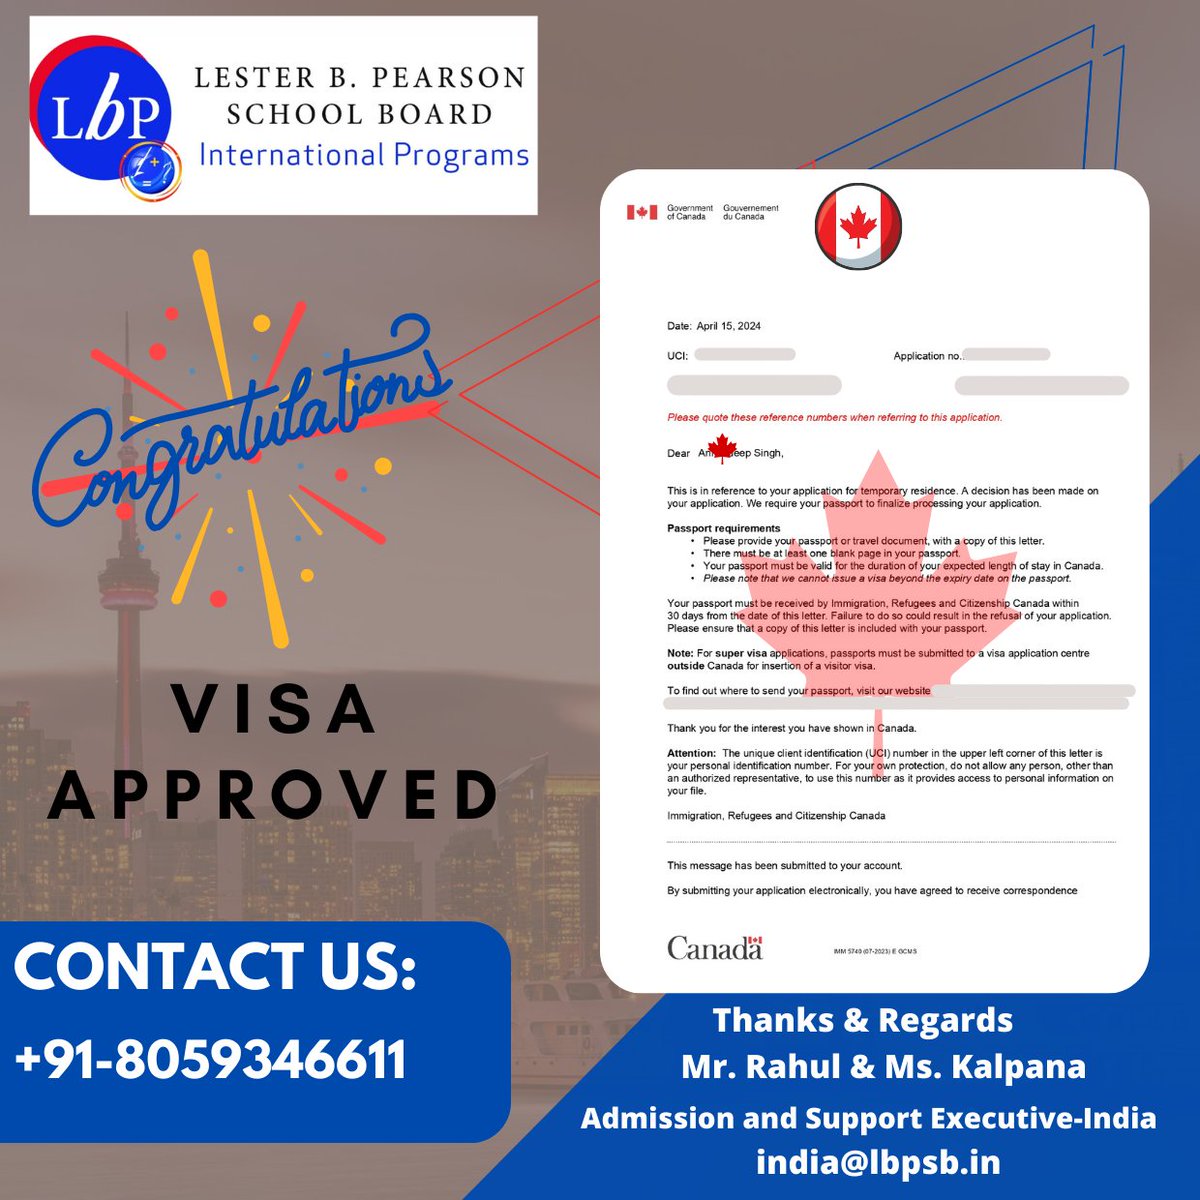 🇨🇦 🇨🇦 Canada Study Visa Approval 🇨🇦 🇨🇦

Mr. Vishal Manocha Congratulates Anmoldeep Singh for getting a Study visa approved for Lester College. 🇨🇦  
.
#networthimmigrationsolutions #workpermit #bhfyp #foryou #canadalifestyle #studypermit #visitorvisa #canadavisa